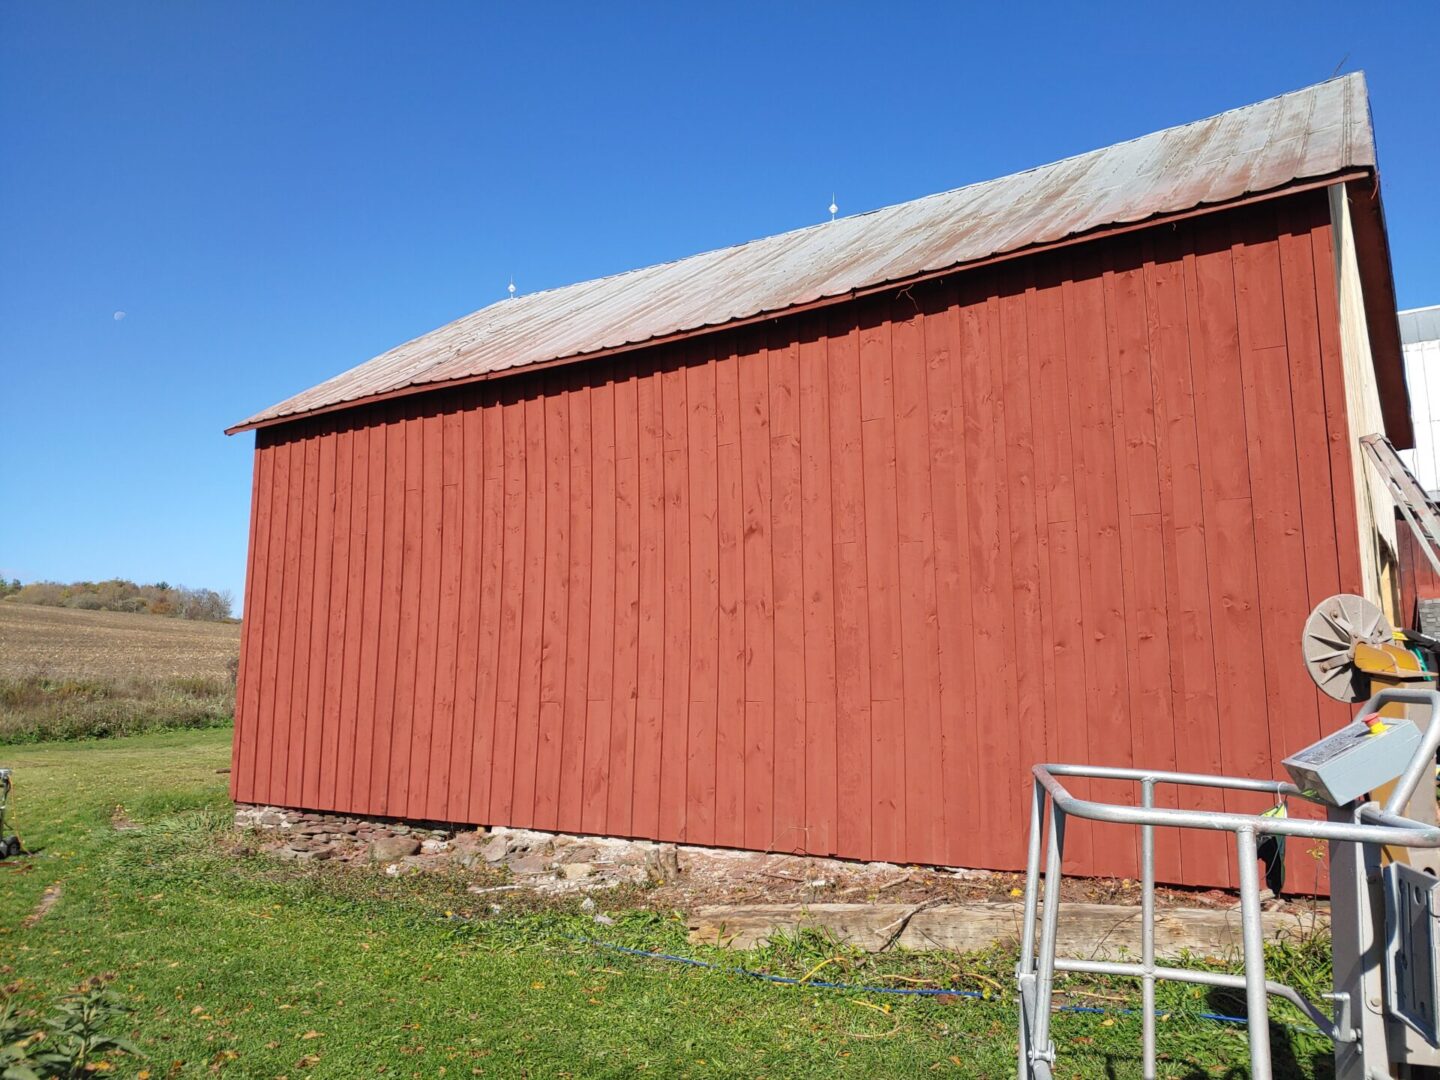 A red barn with a metal roof and grass